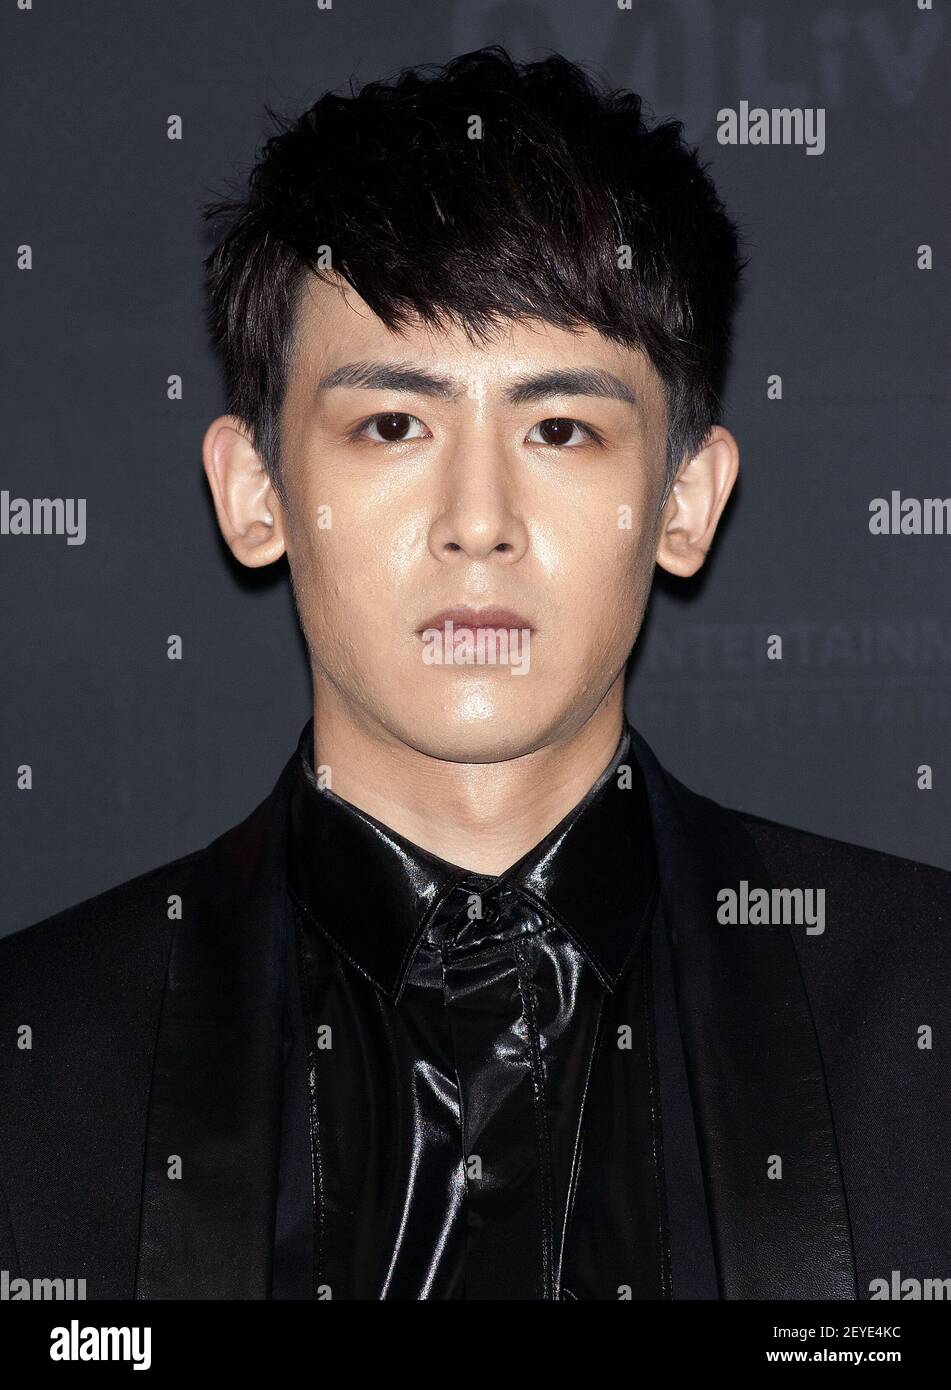 22 June 2013 - Seoul, South Korea : Thailander Nichkhun, member of boys group 2PM, attends a press conference for the Asia tour final live concert 'WHAT TIME IS IT' in Seoul, at Jamsil Gymnasium in Seoul, South Korea on June 22, 2013. (Photo by: Lee Young-Ho/Sipa USA) Stock Photo